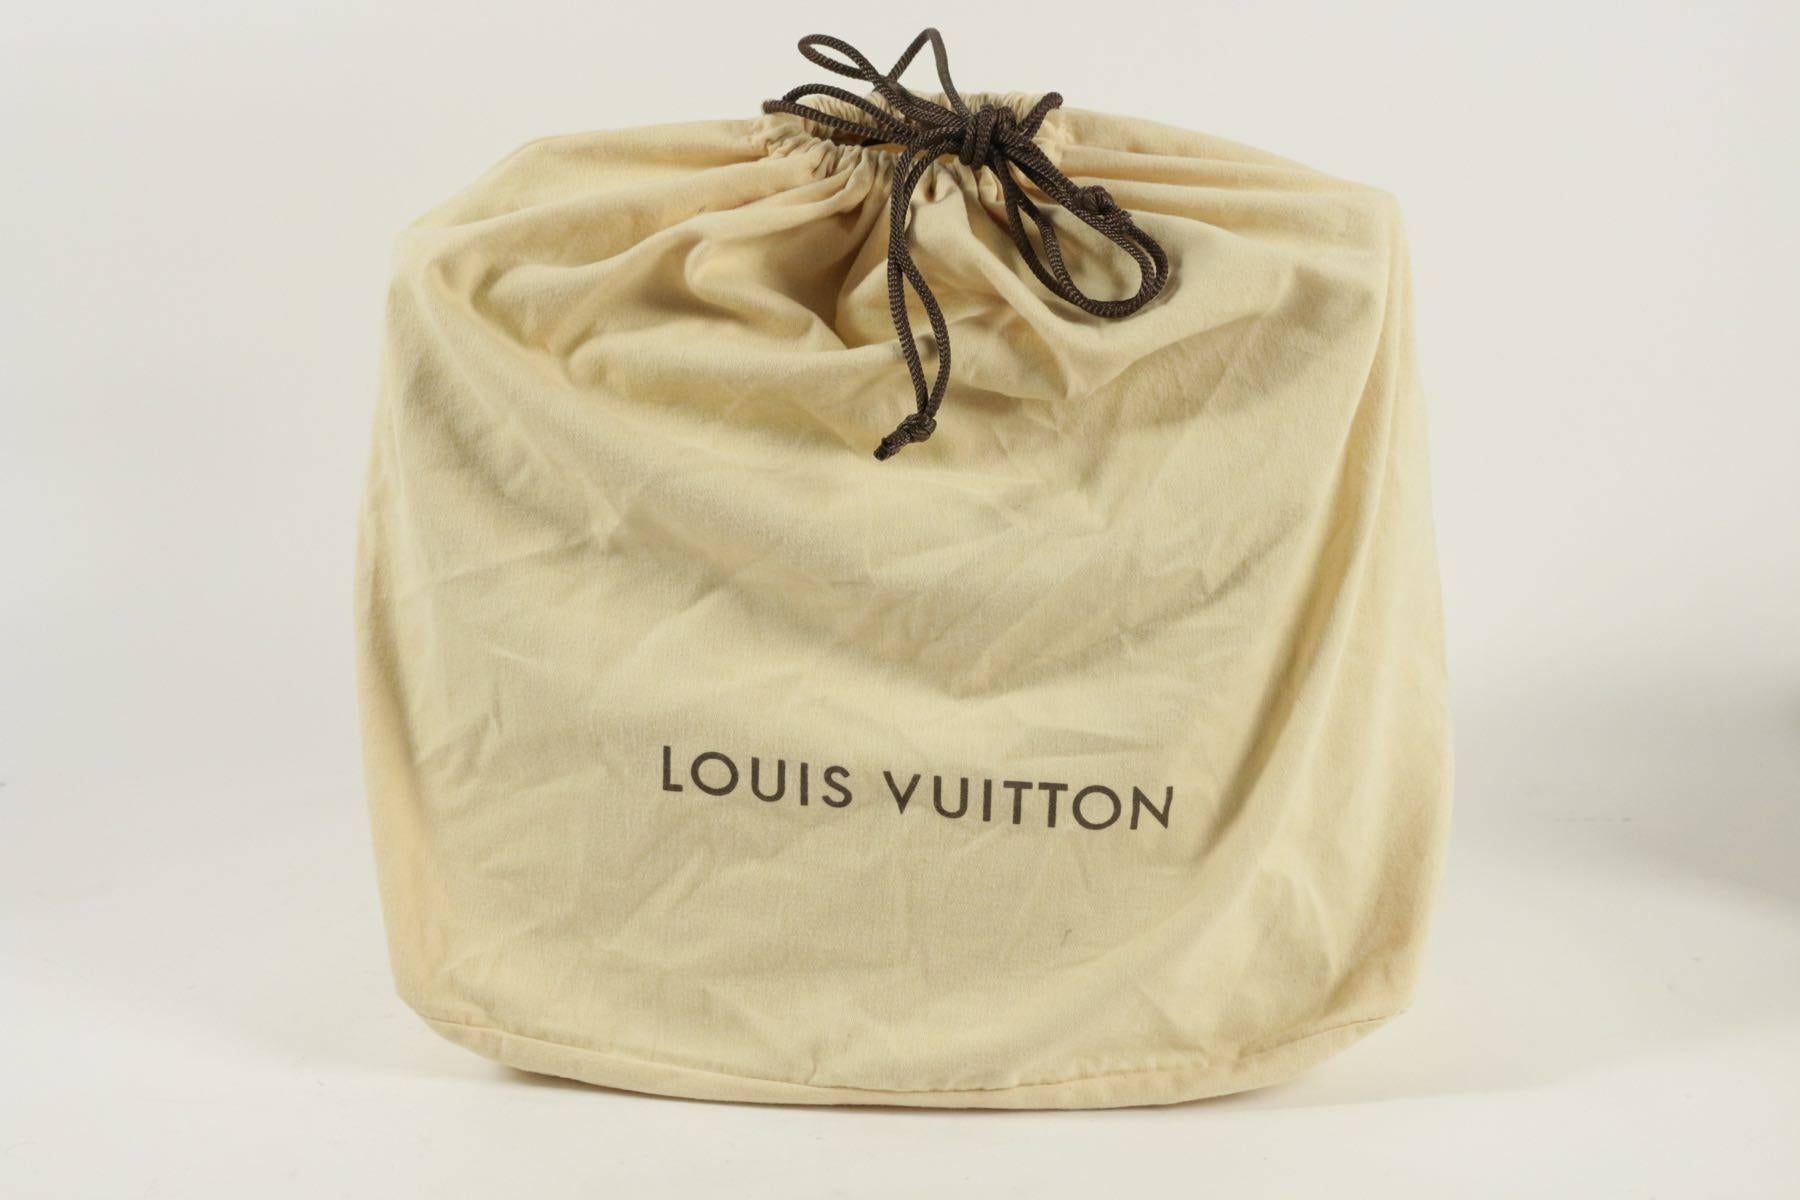 Pre-Owned Tadao Bag by Louis Vuitton, Grey and Black 4